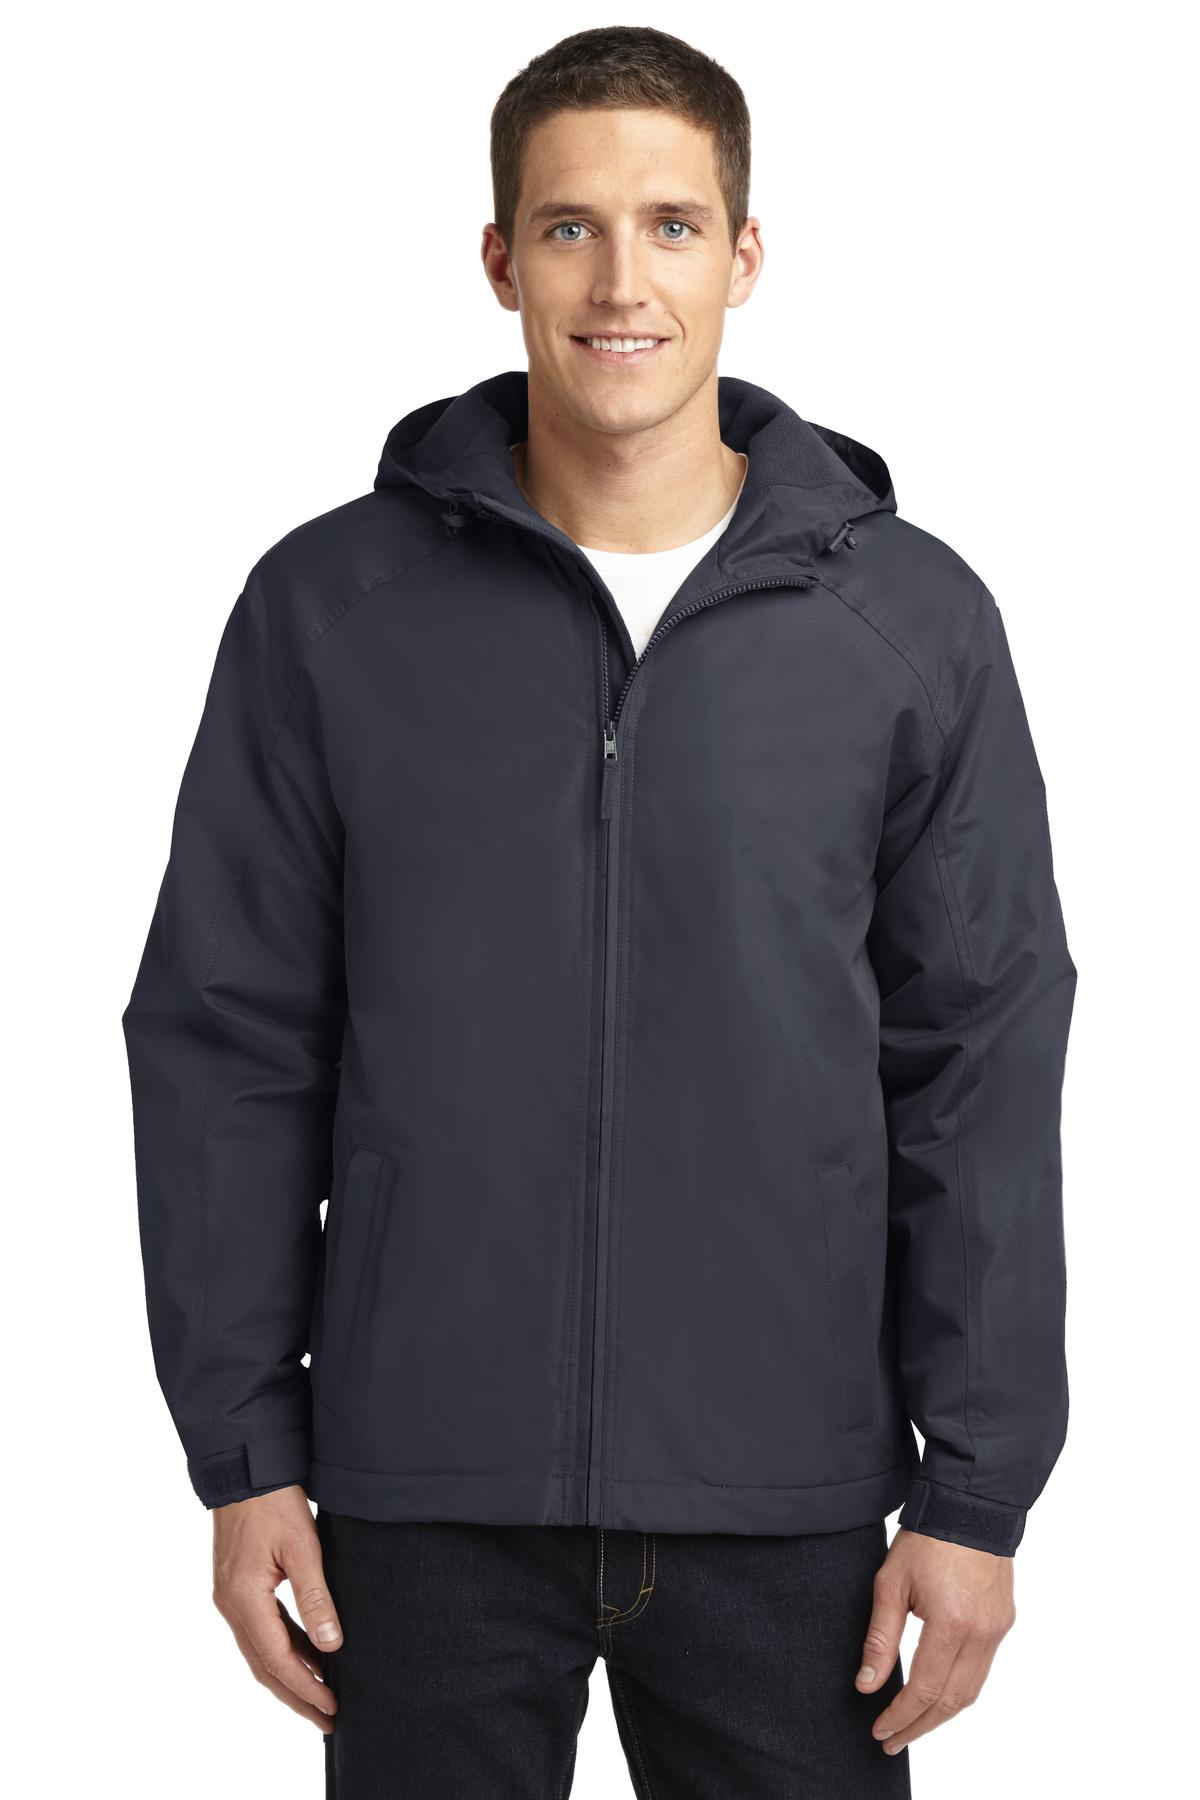 Port Authority Hospitality Outerwear ® Hooded Charger Jacket.-Port Authority